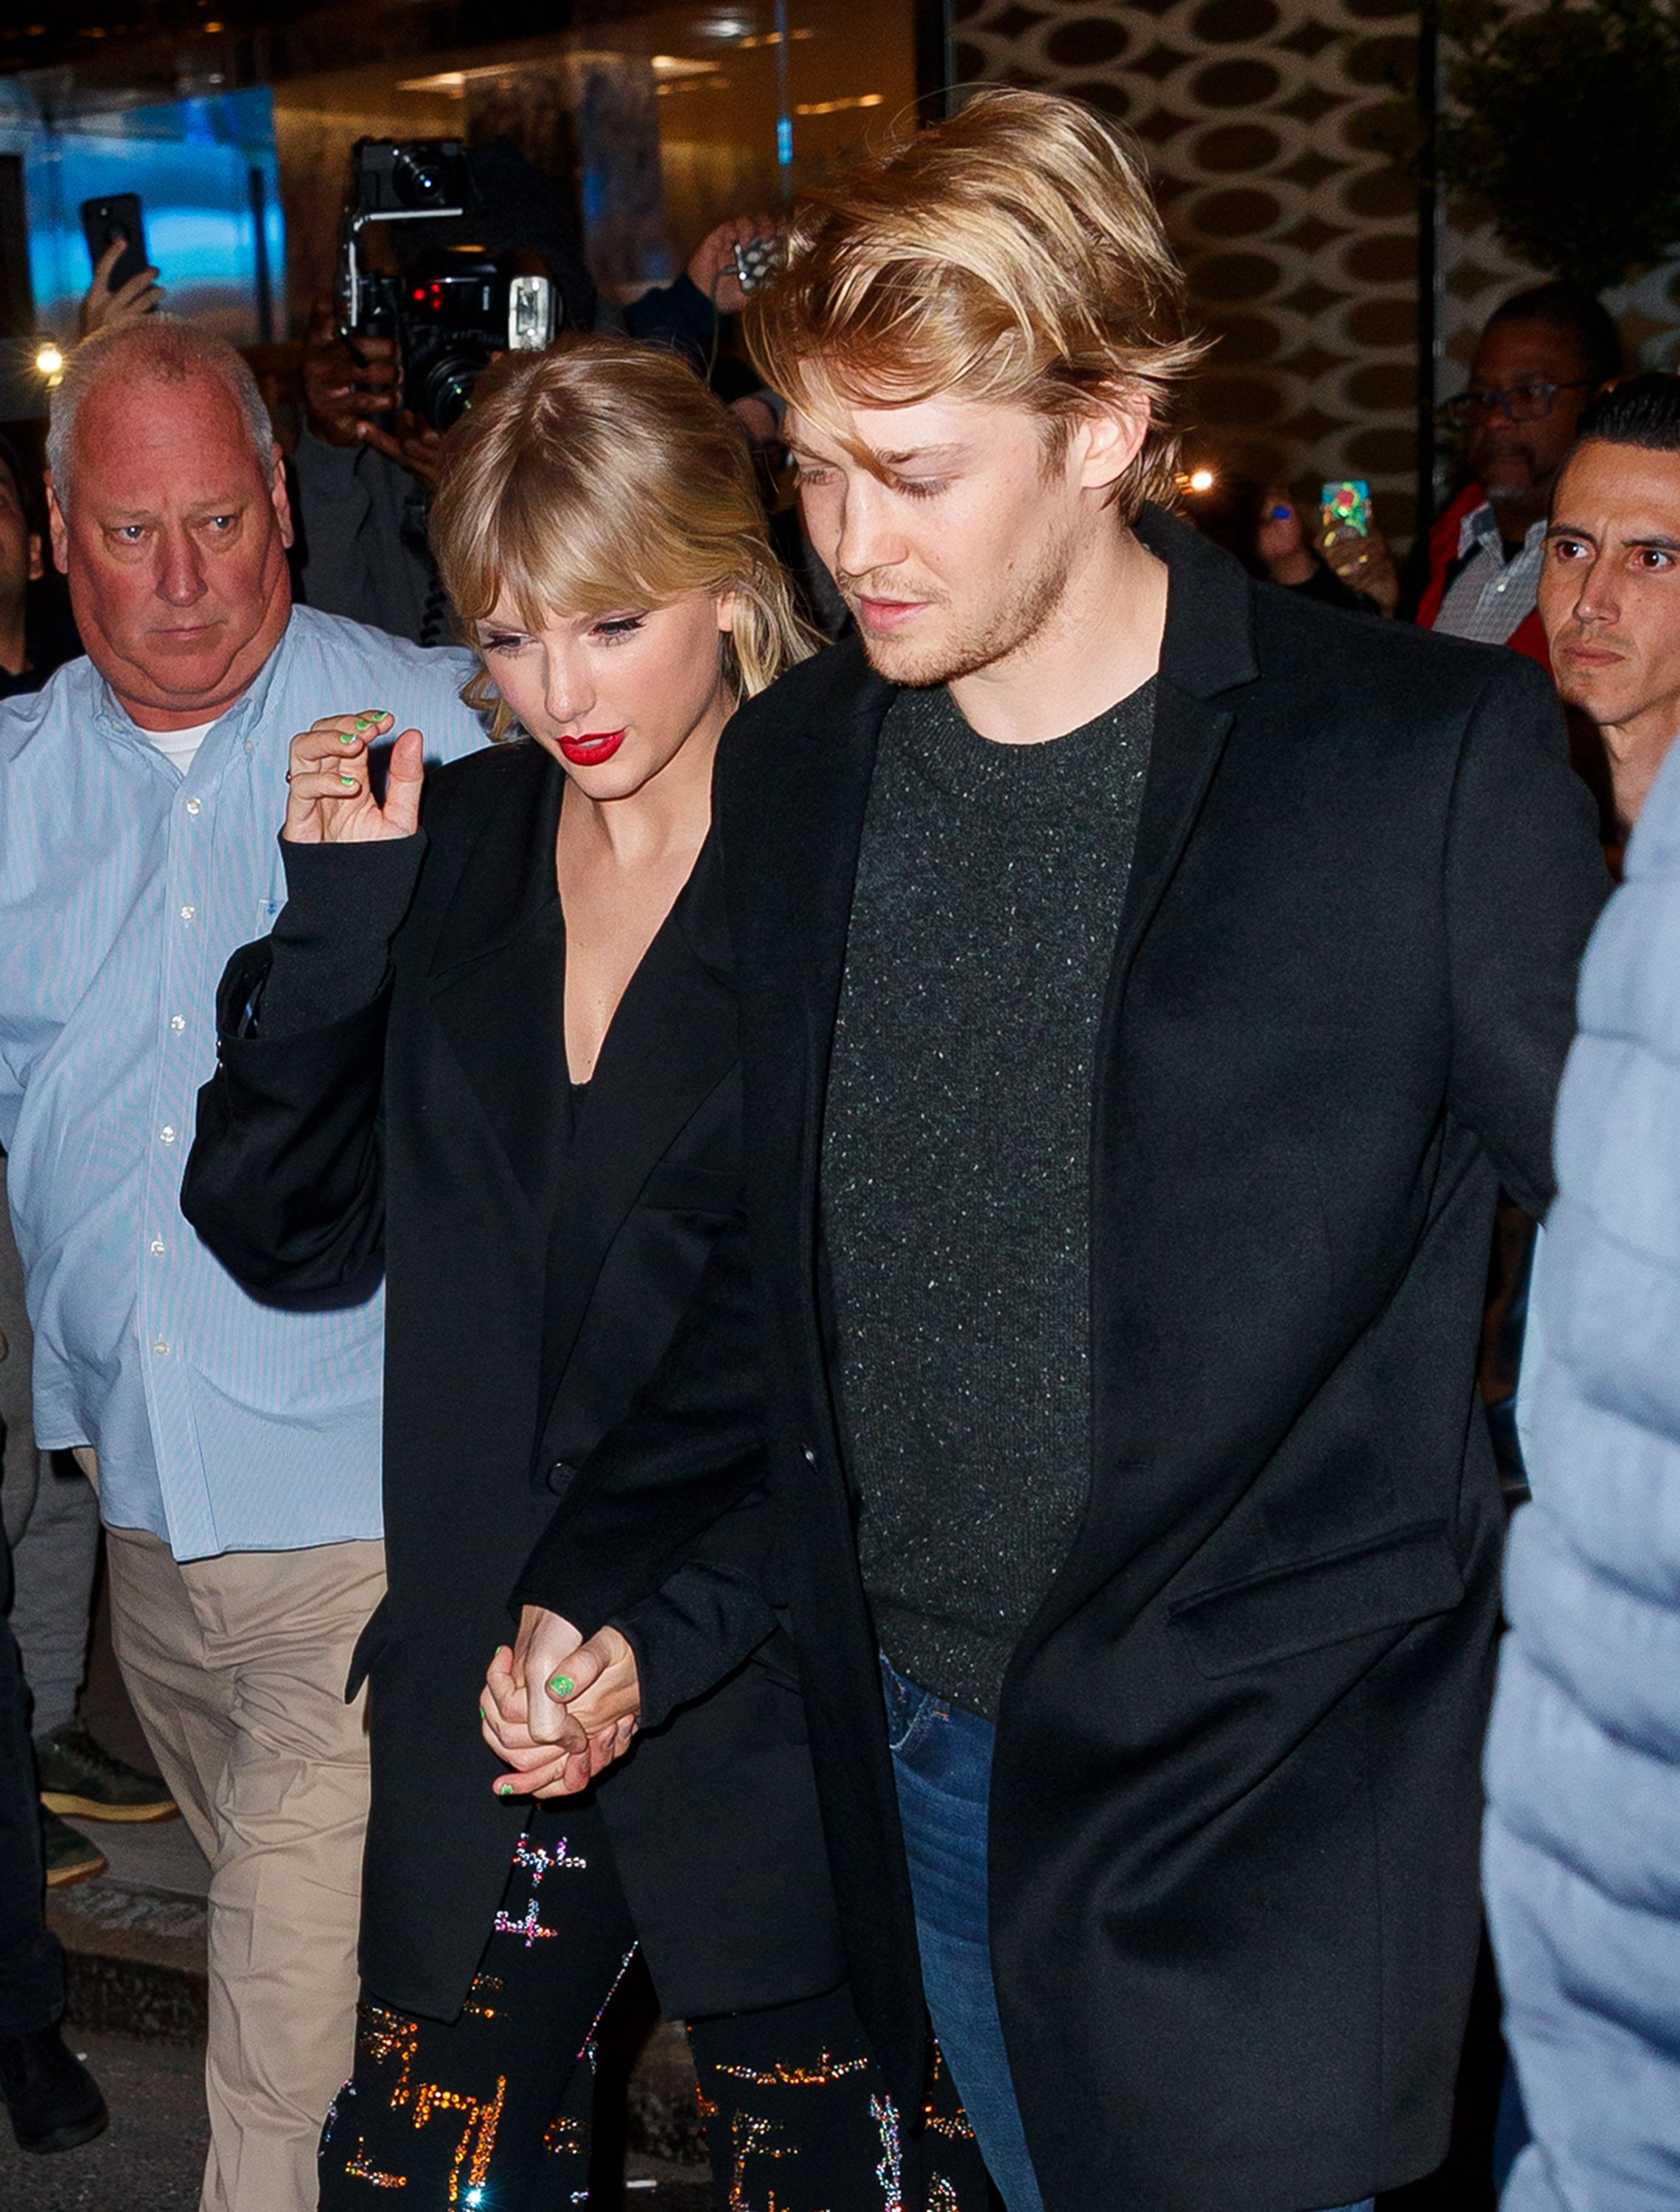 Did Taylor Swift Reveal Shes Engaged to Joe Alwyn in Midnights Album Lyrics? picture